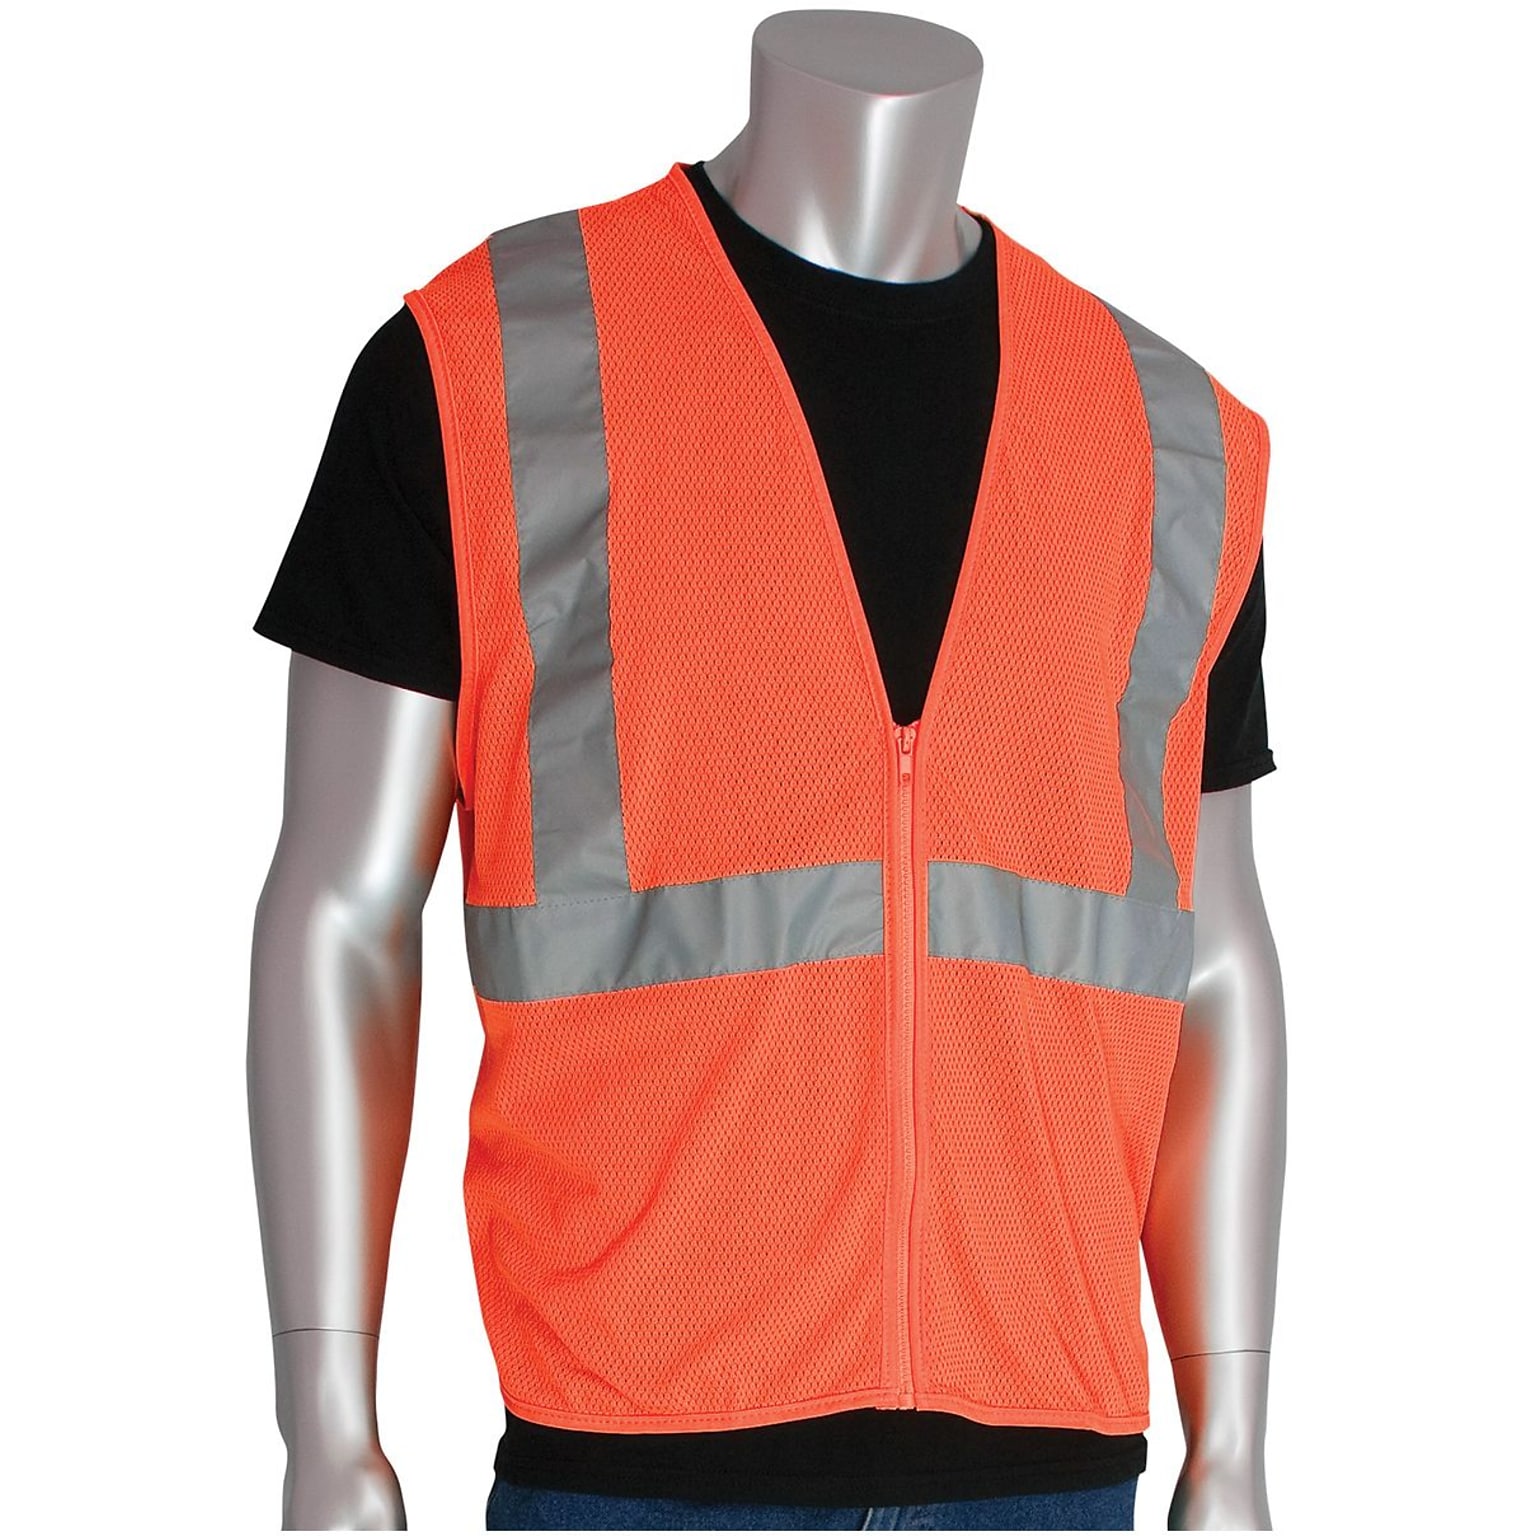 Protective Industrial Products High Visibility Sleeveless Safety Vest, ANSI Class R2, Orange, X-Large (302-MVGZOR-XL)